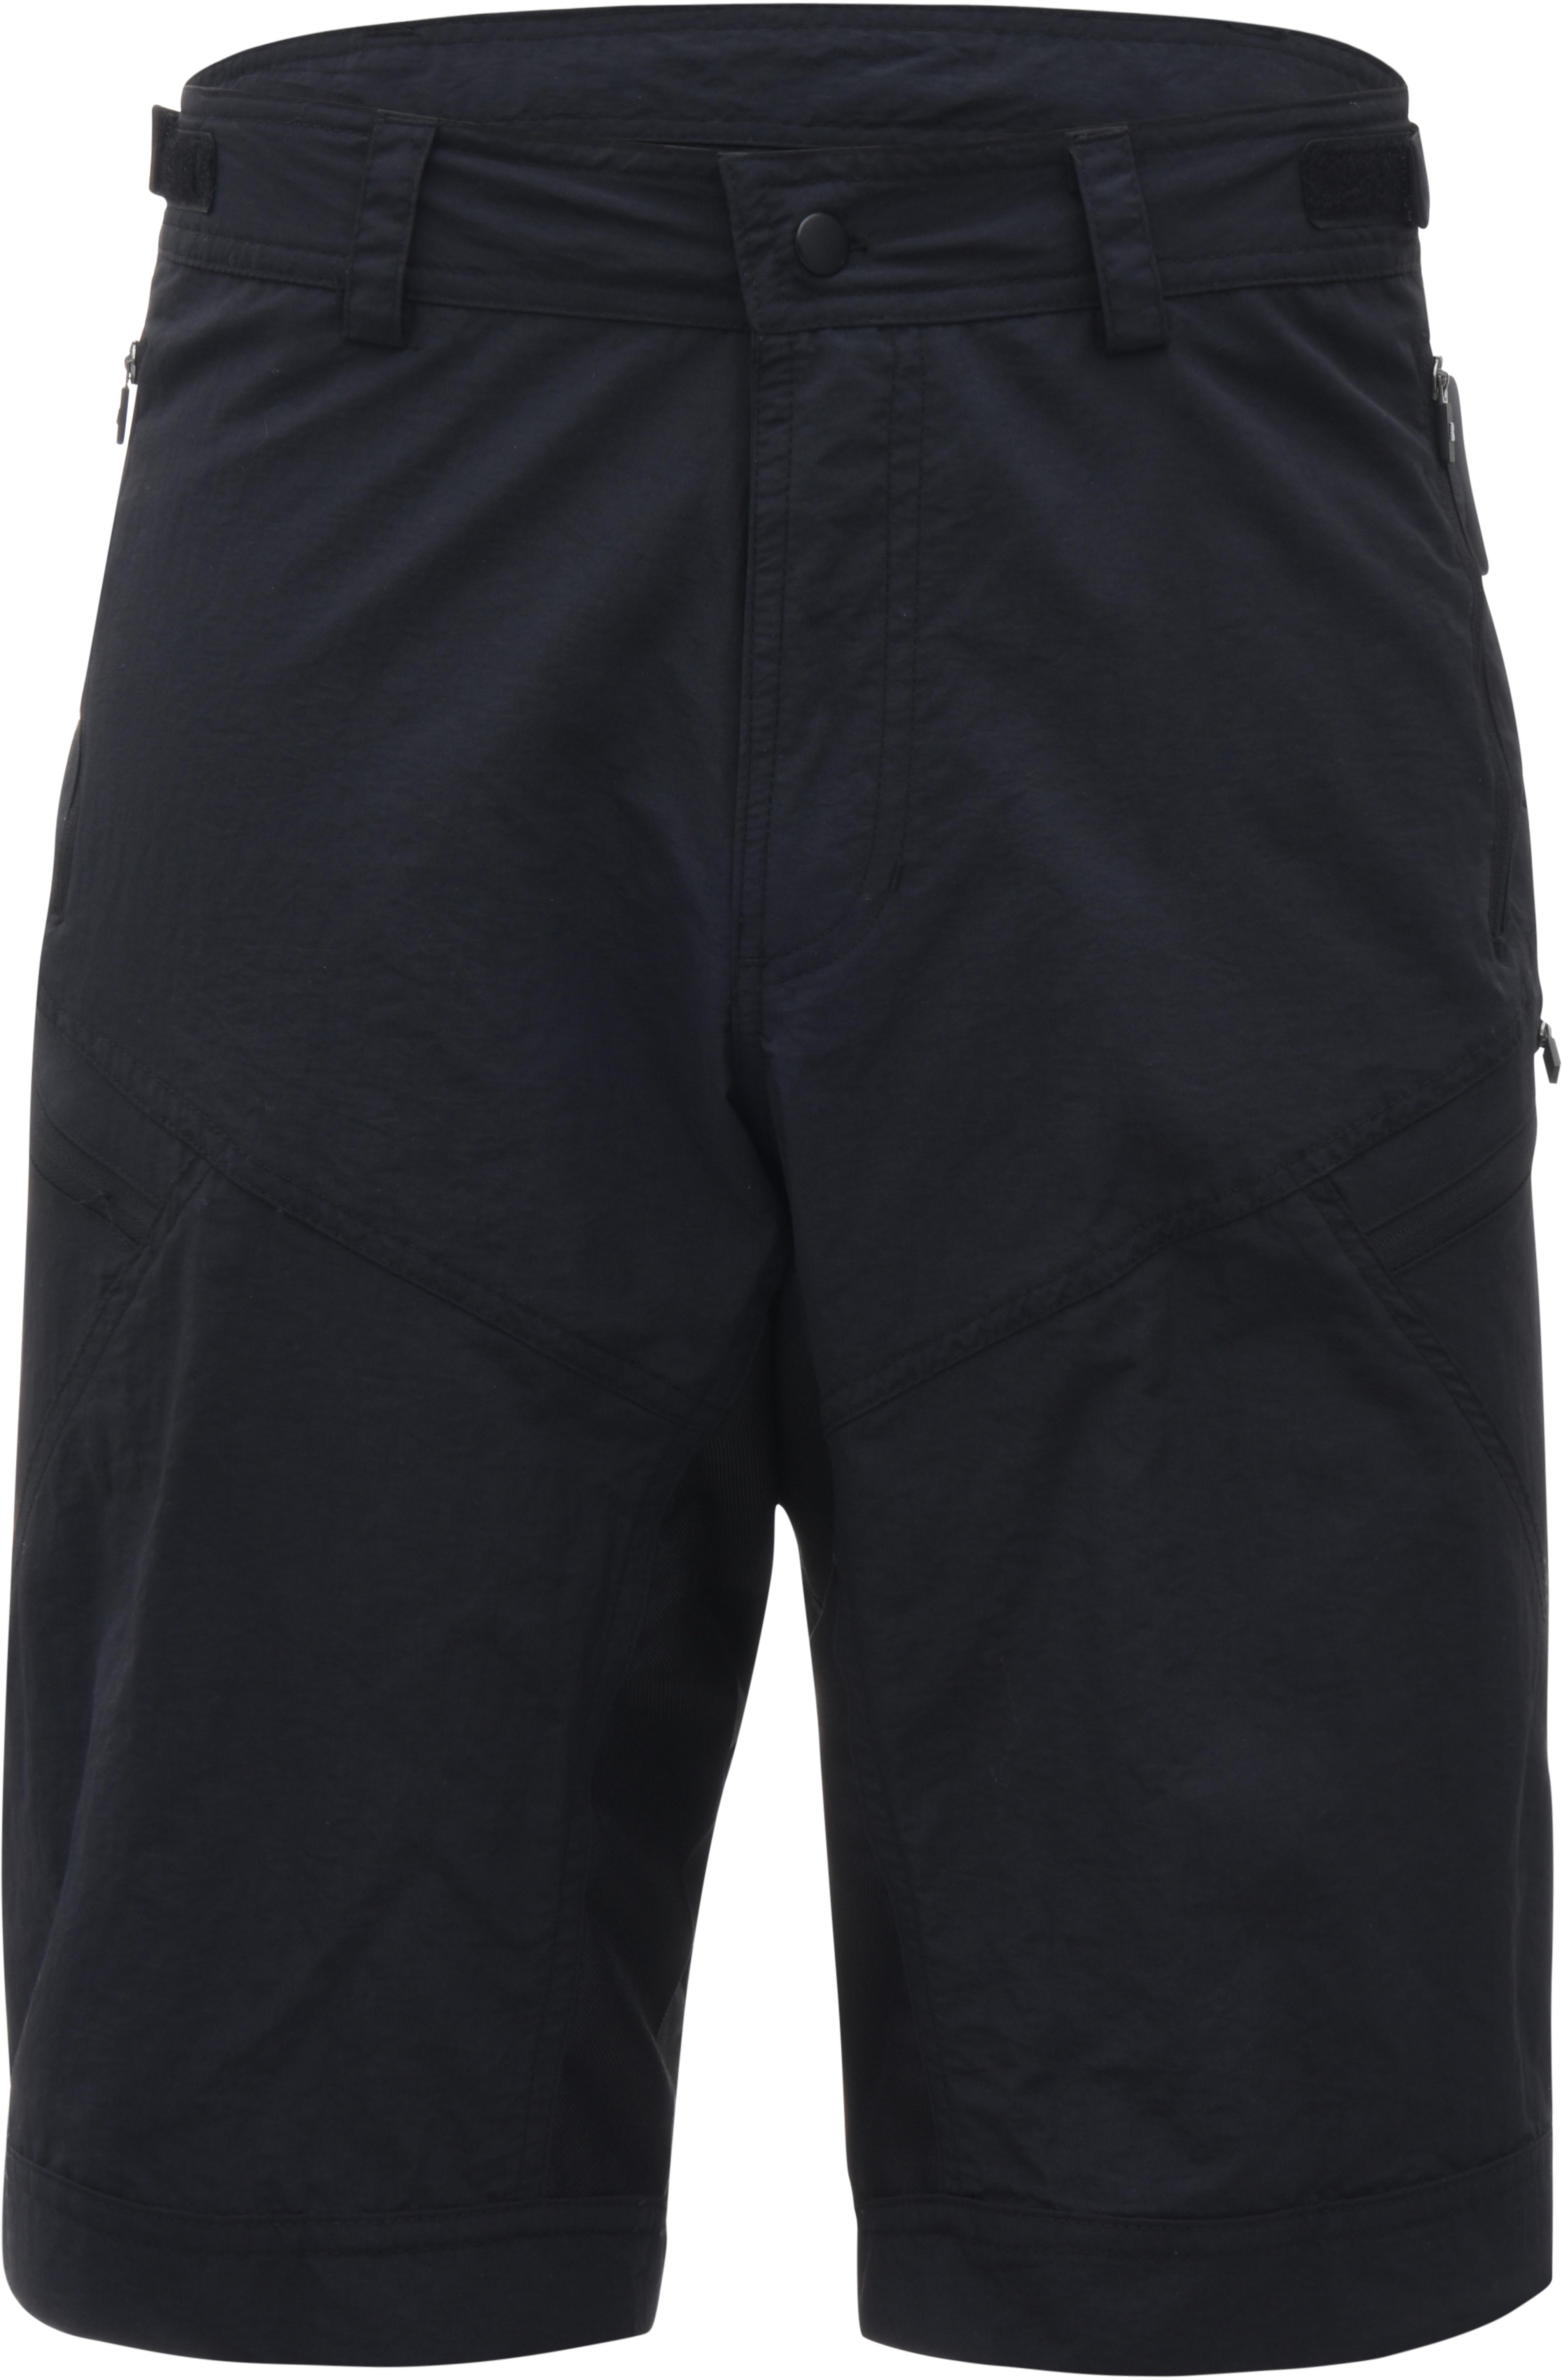 Boardman Mens Casual Shorts, Xxx Large for only Â£25.00